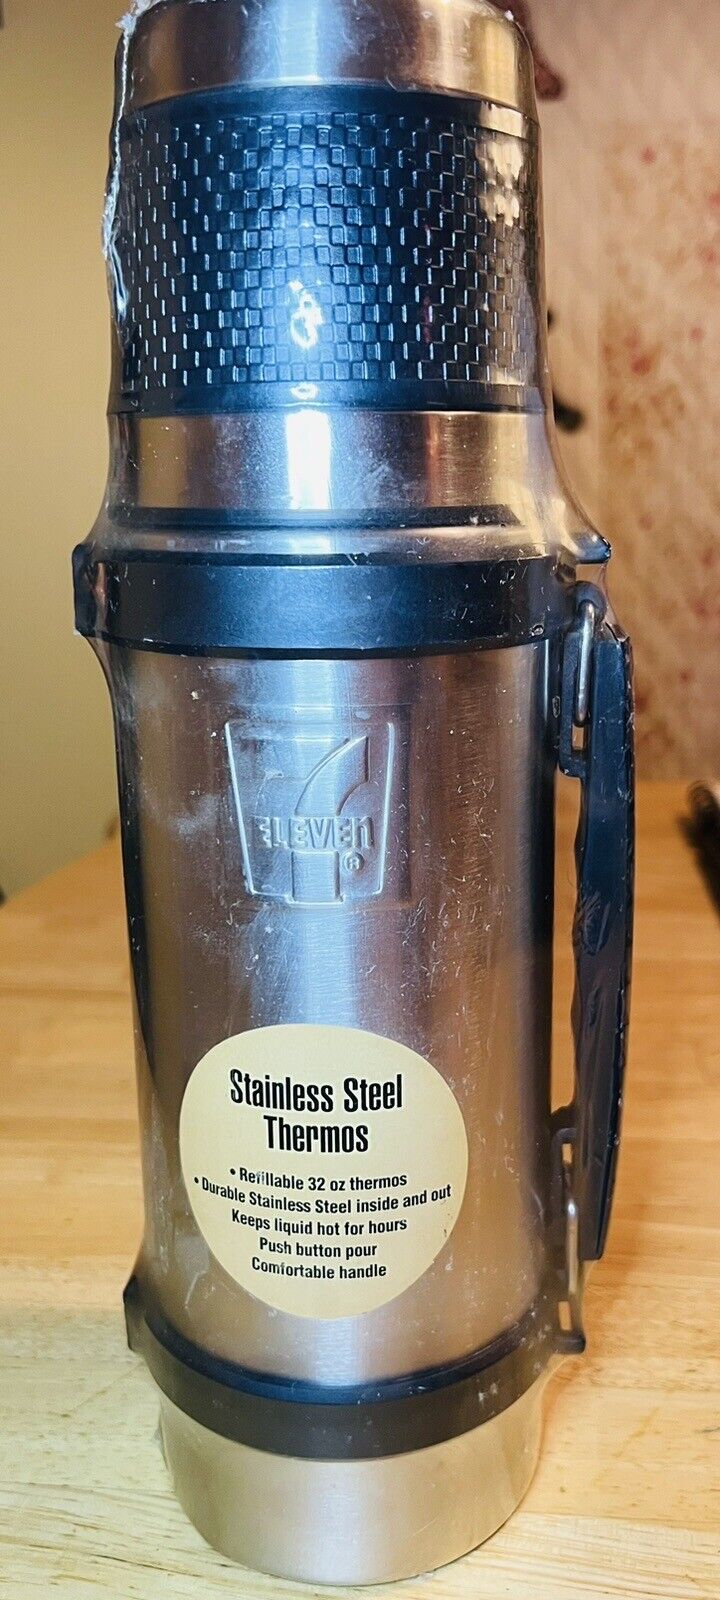 Vintage 7-11 / 7 ELEVEN STAINLESS STEEL THERMOS - Hot / Cold Coffee - NEW